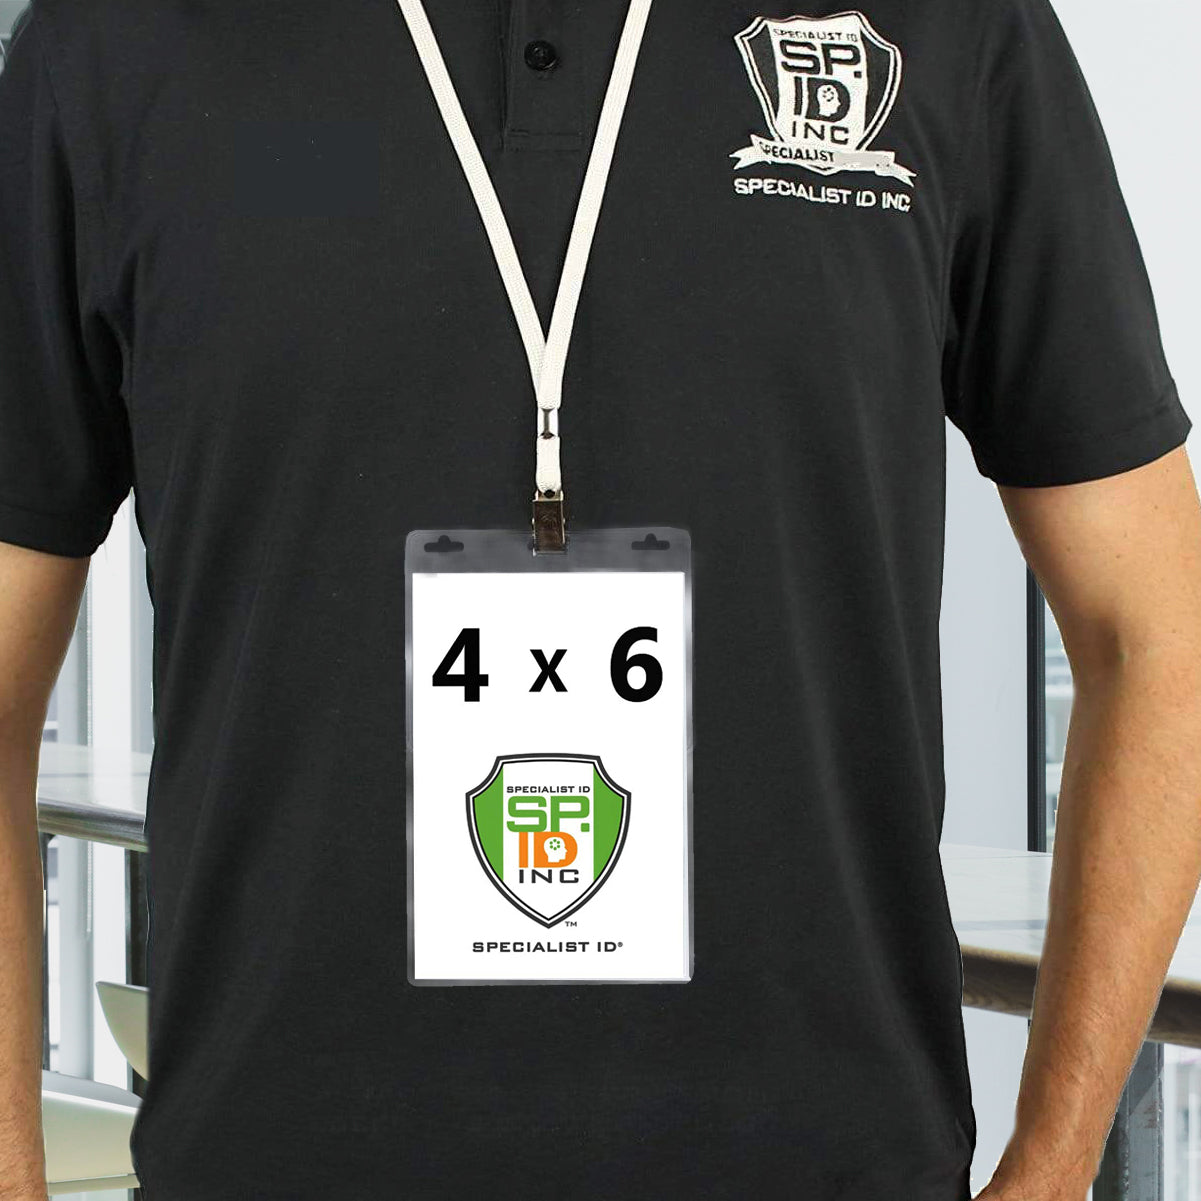 Person wearing a black polo shirt with "Specialist ID Inc" text and logo, displaying an oversized badge with a "4 x 6" label inside a Vertical Oversized 4X6 Vinyl ID Badge Holder (XL46V), also featuring the same logo.